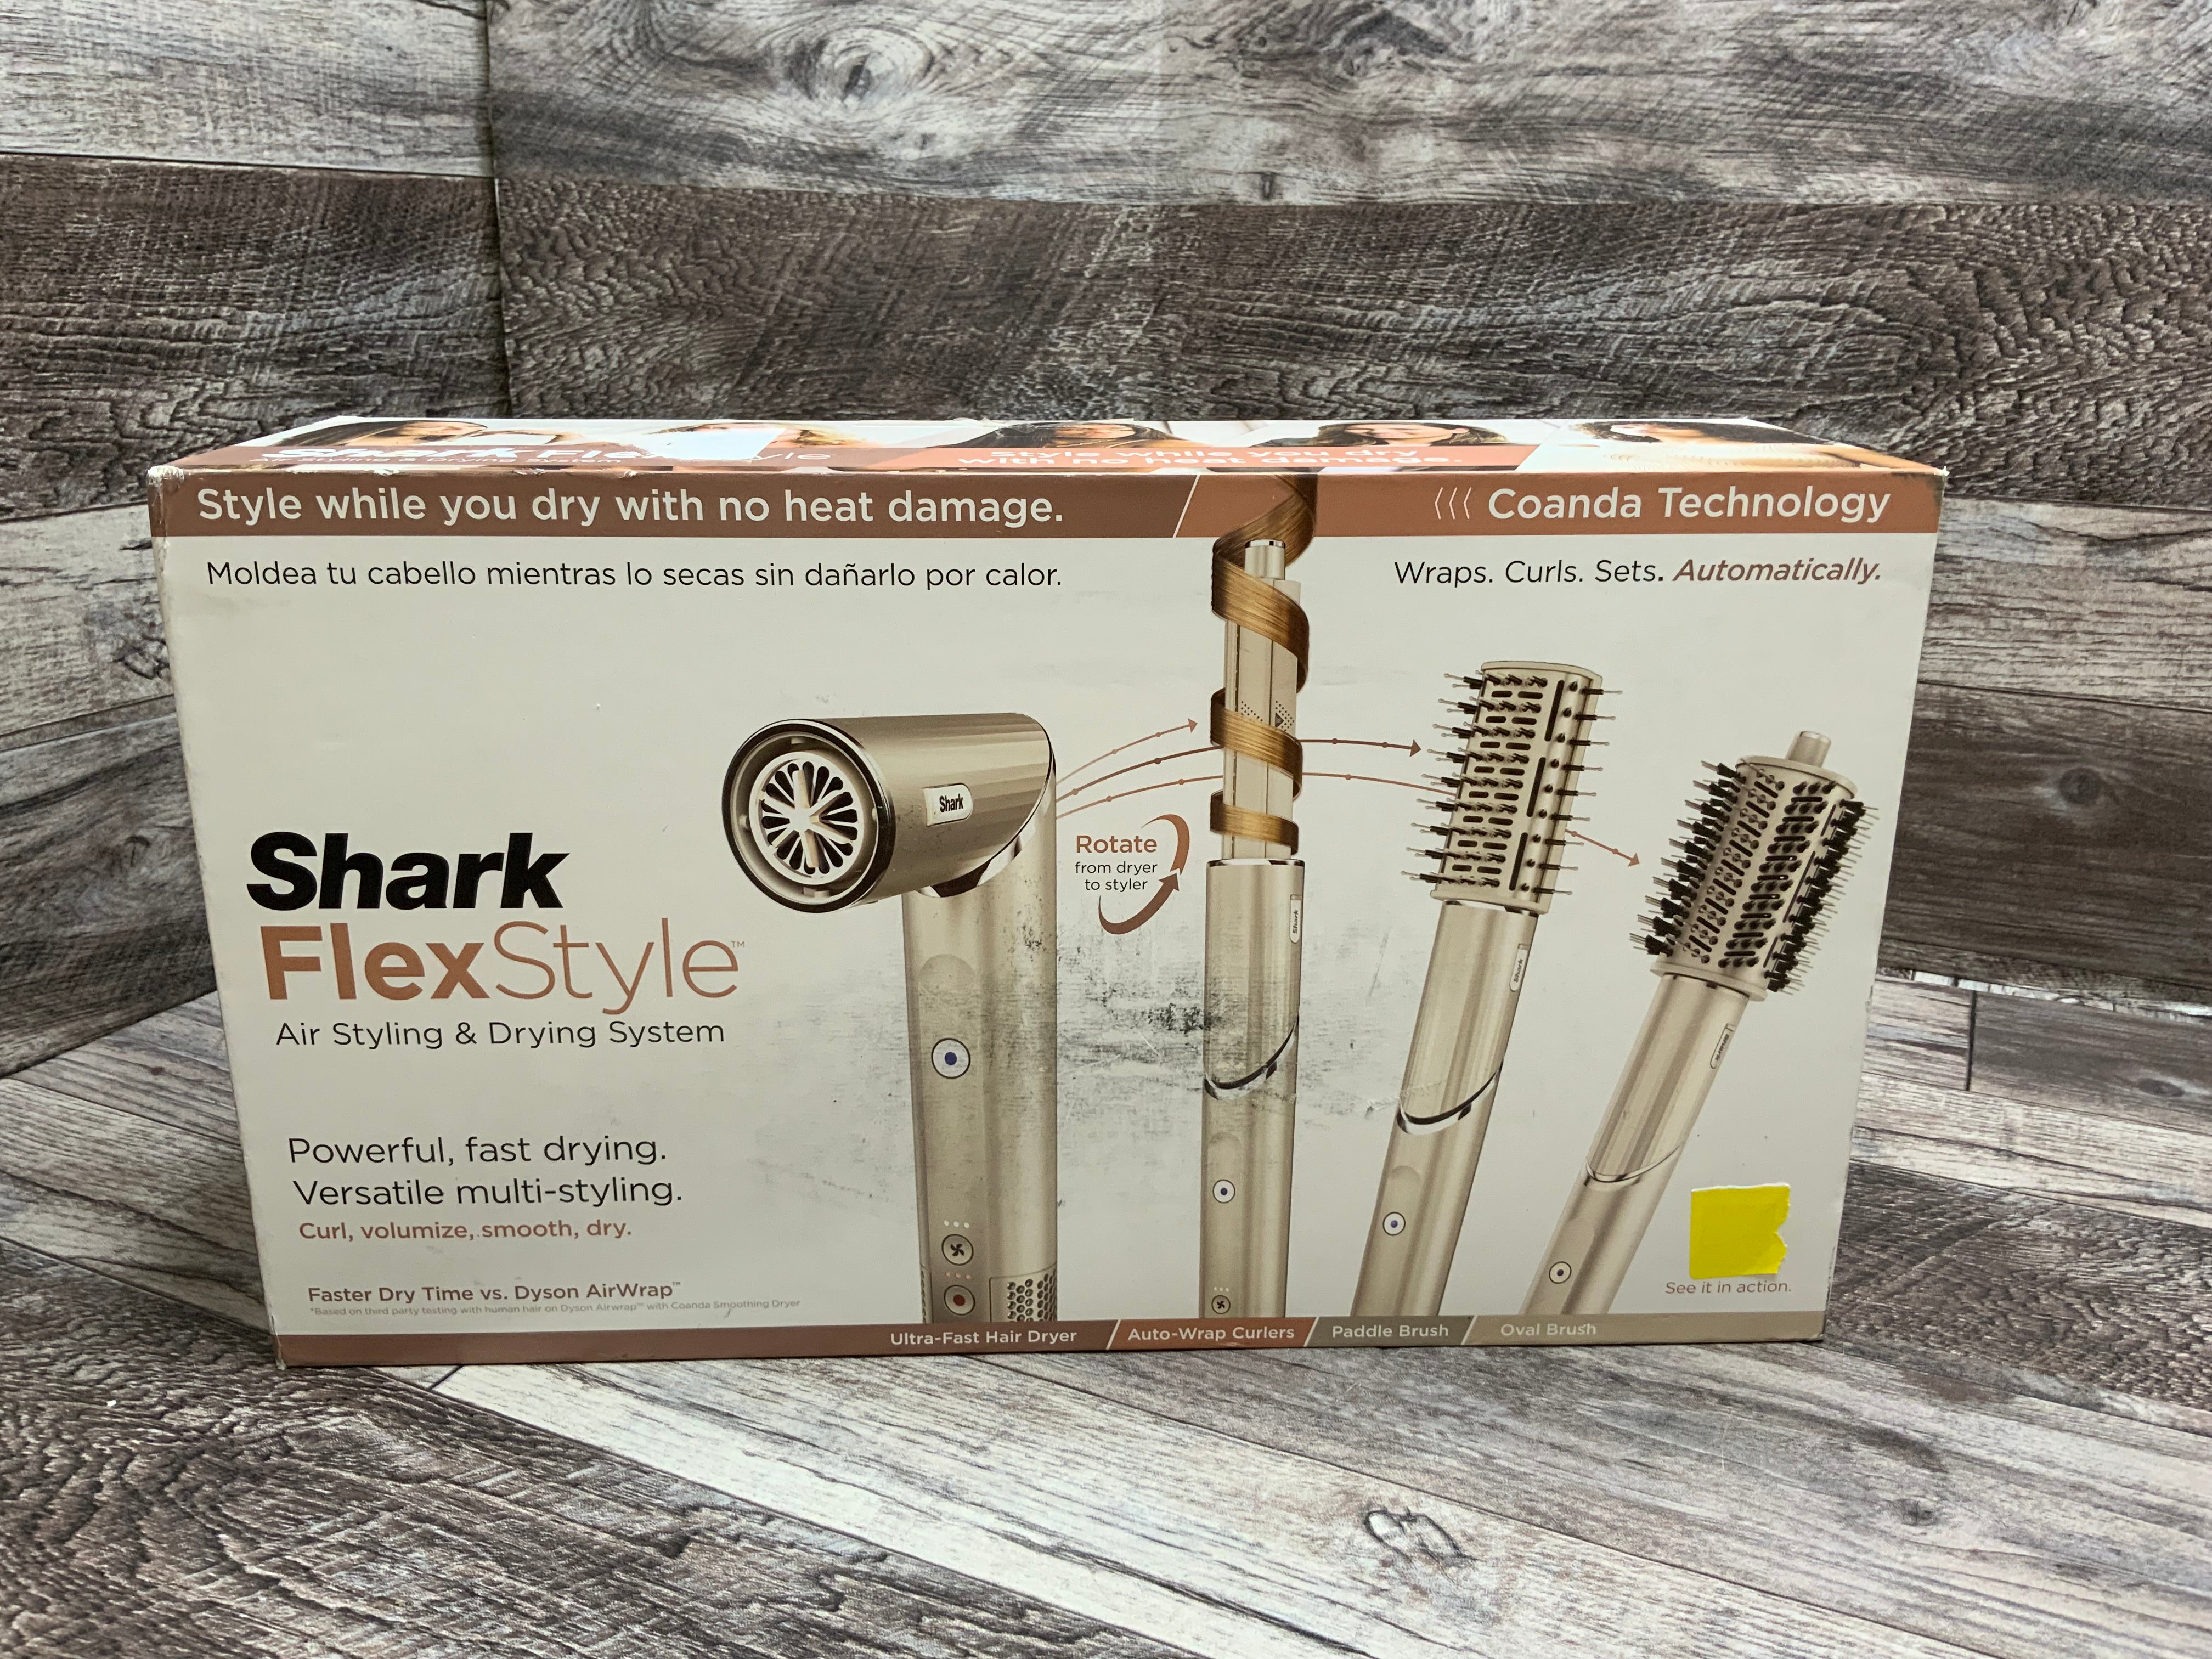 Shark HD430 FlexStyle Air Styling & Drying System (8079646982382)